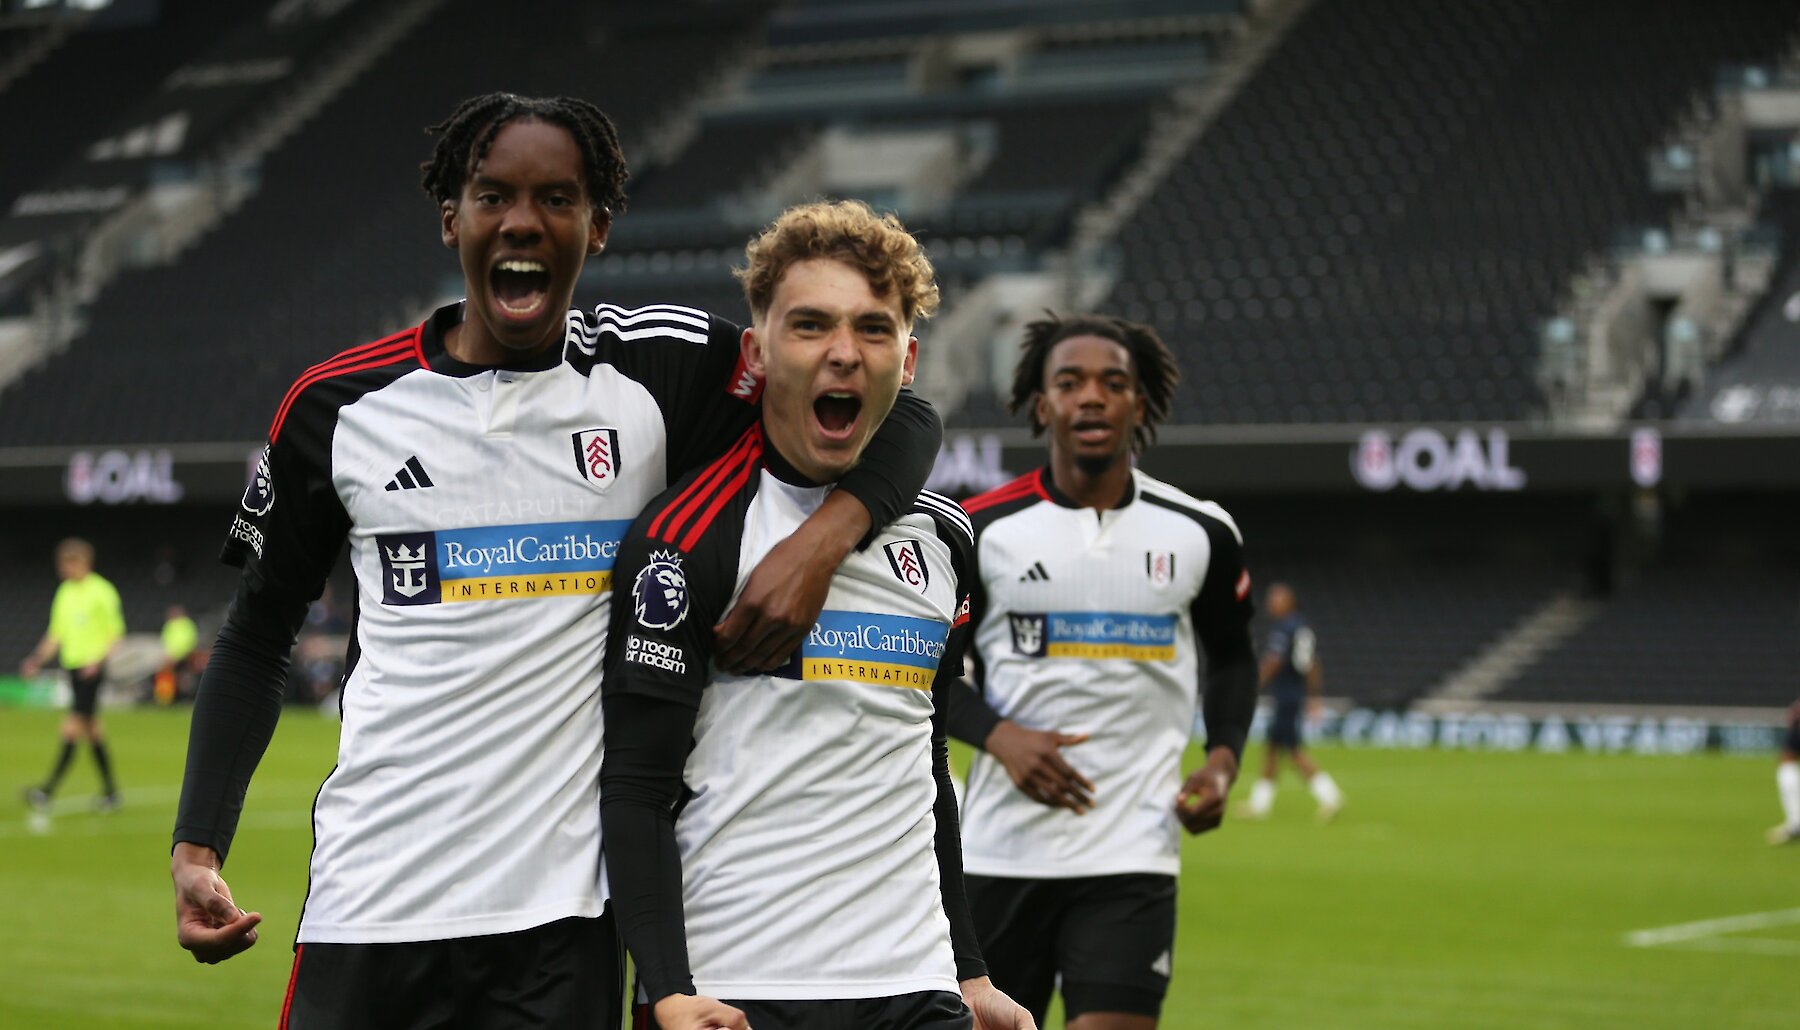 Fulham FC celebrating on the field